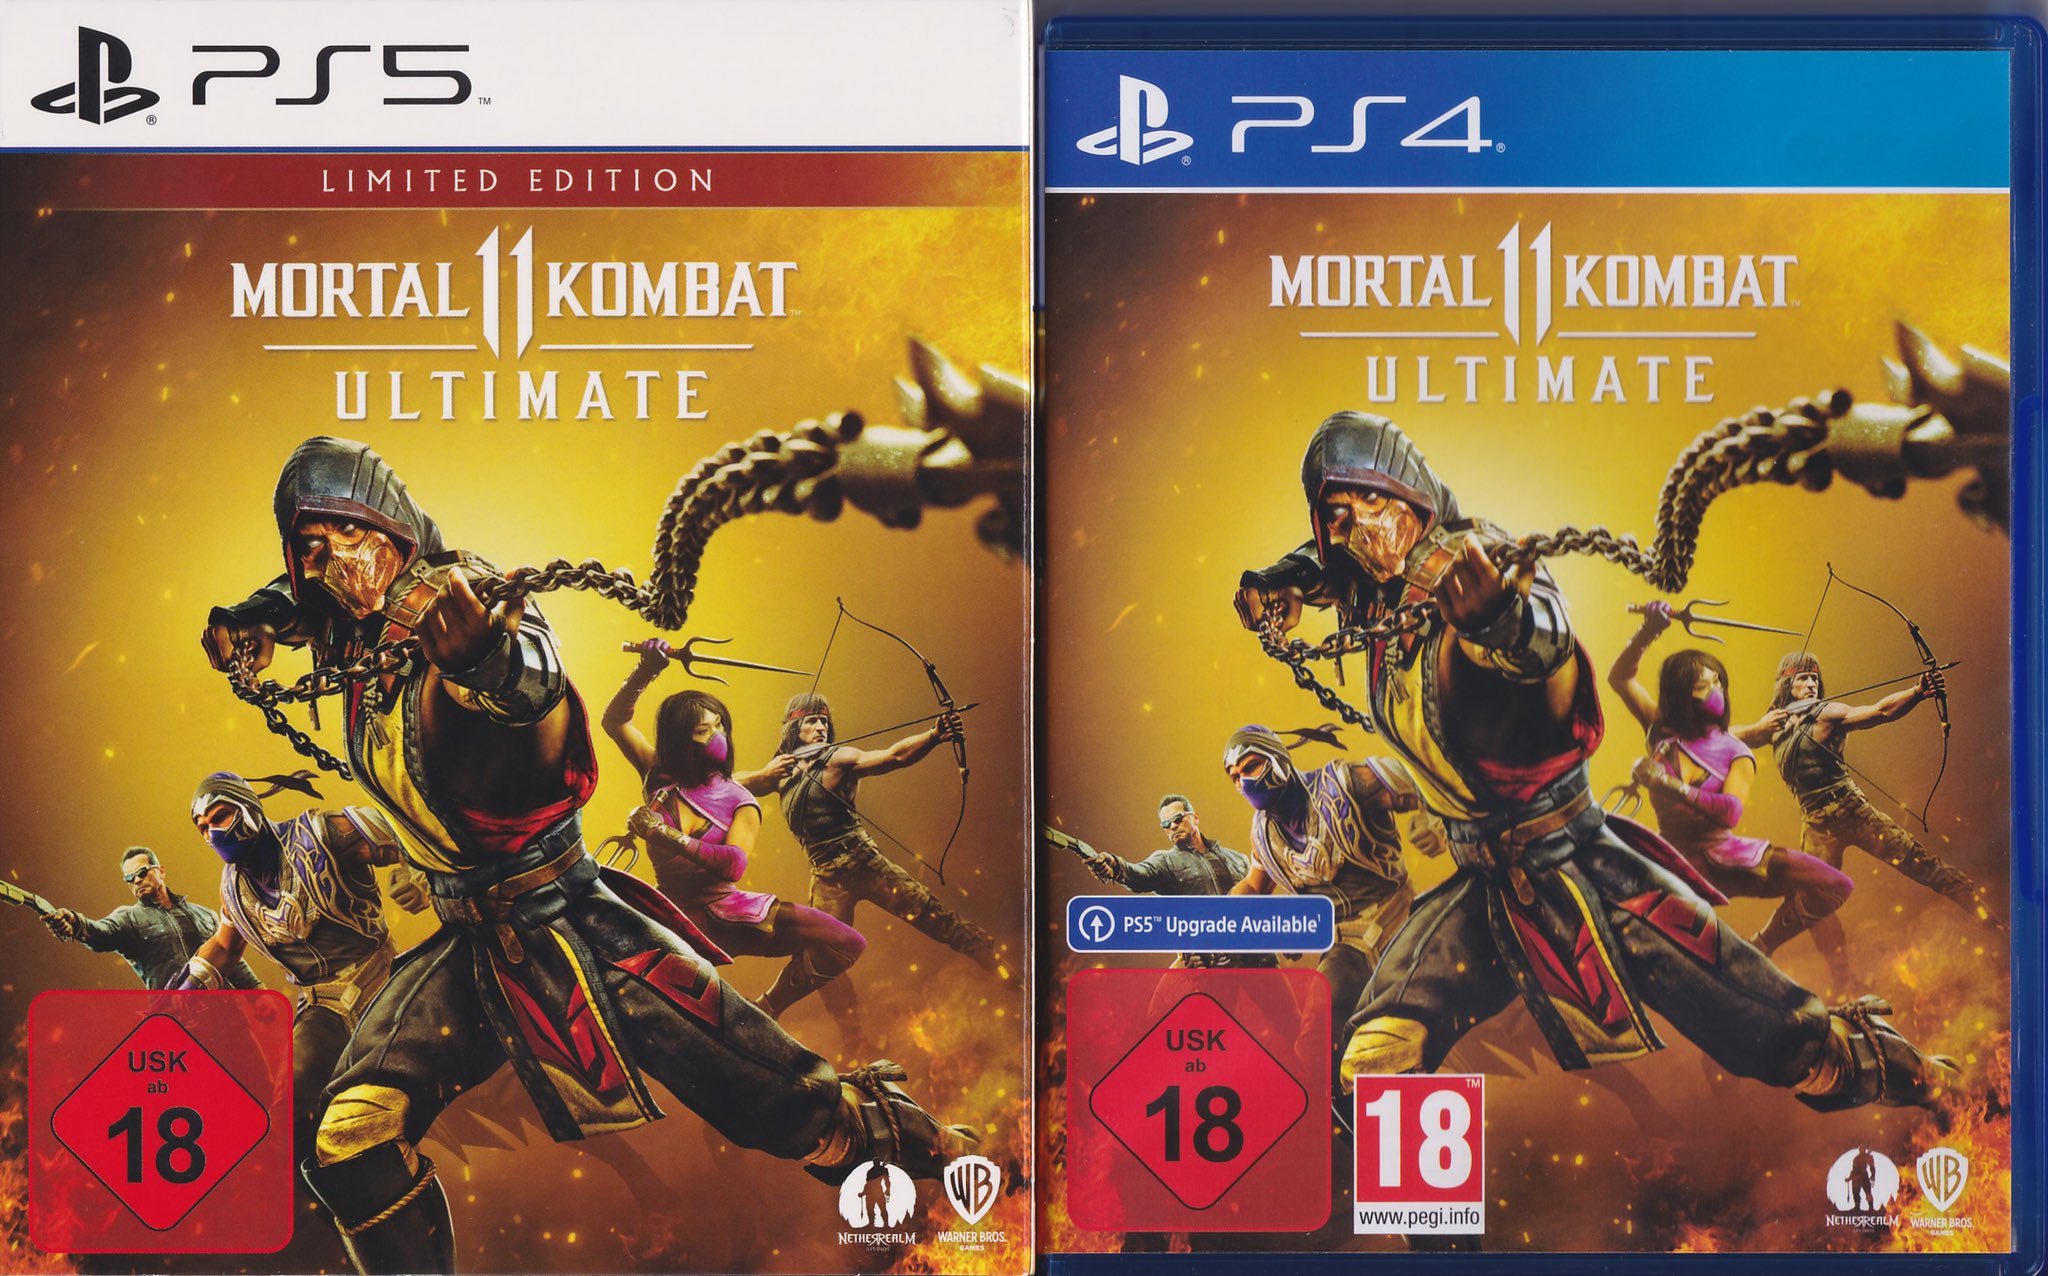 Does It Play Twitterren Mortal Kombat 11 Complete On Disc On Ps4 Including Dlc Across 2 Discs Incomplete On Ps5 And Dlc Packs Are A Redeemed Voucher What And Why Are You